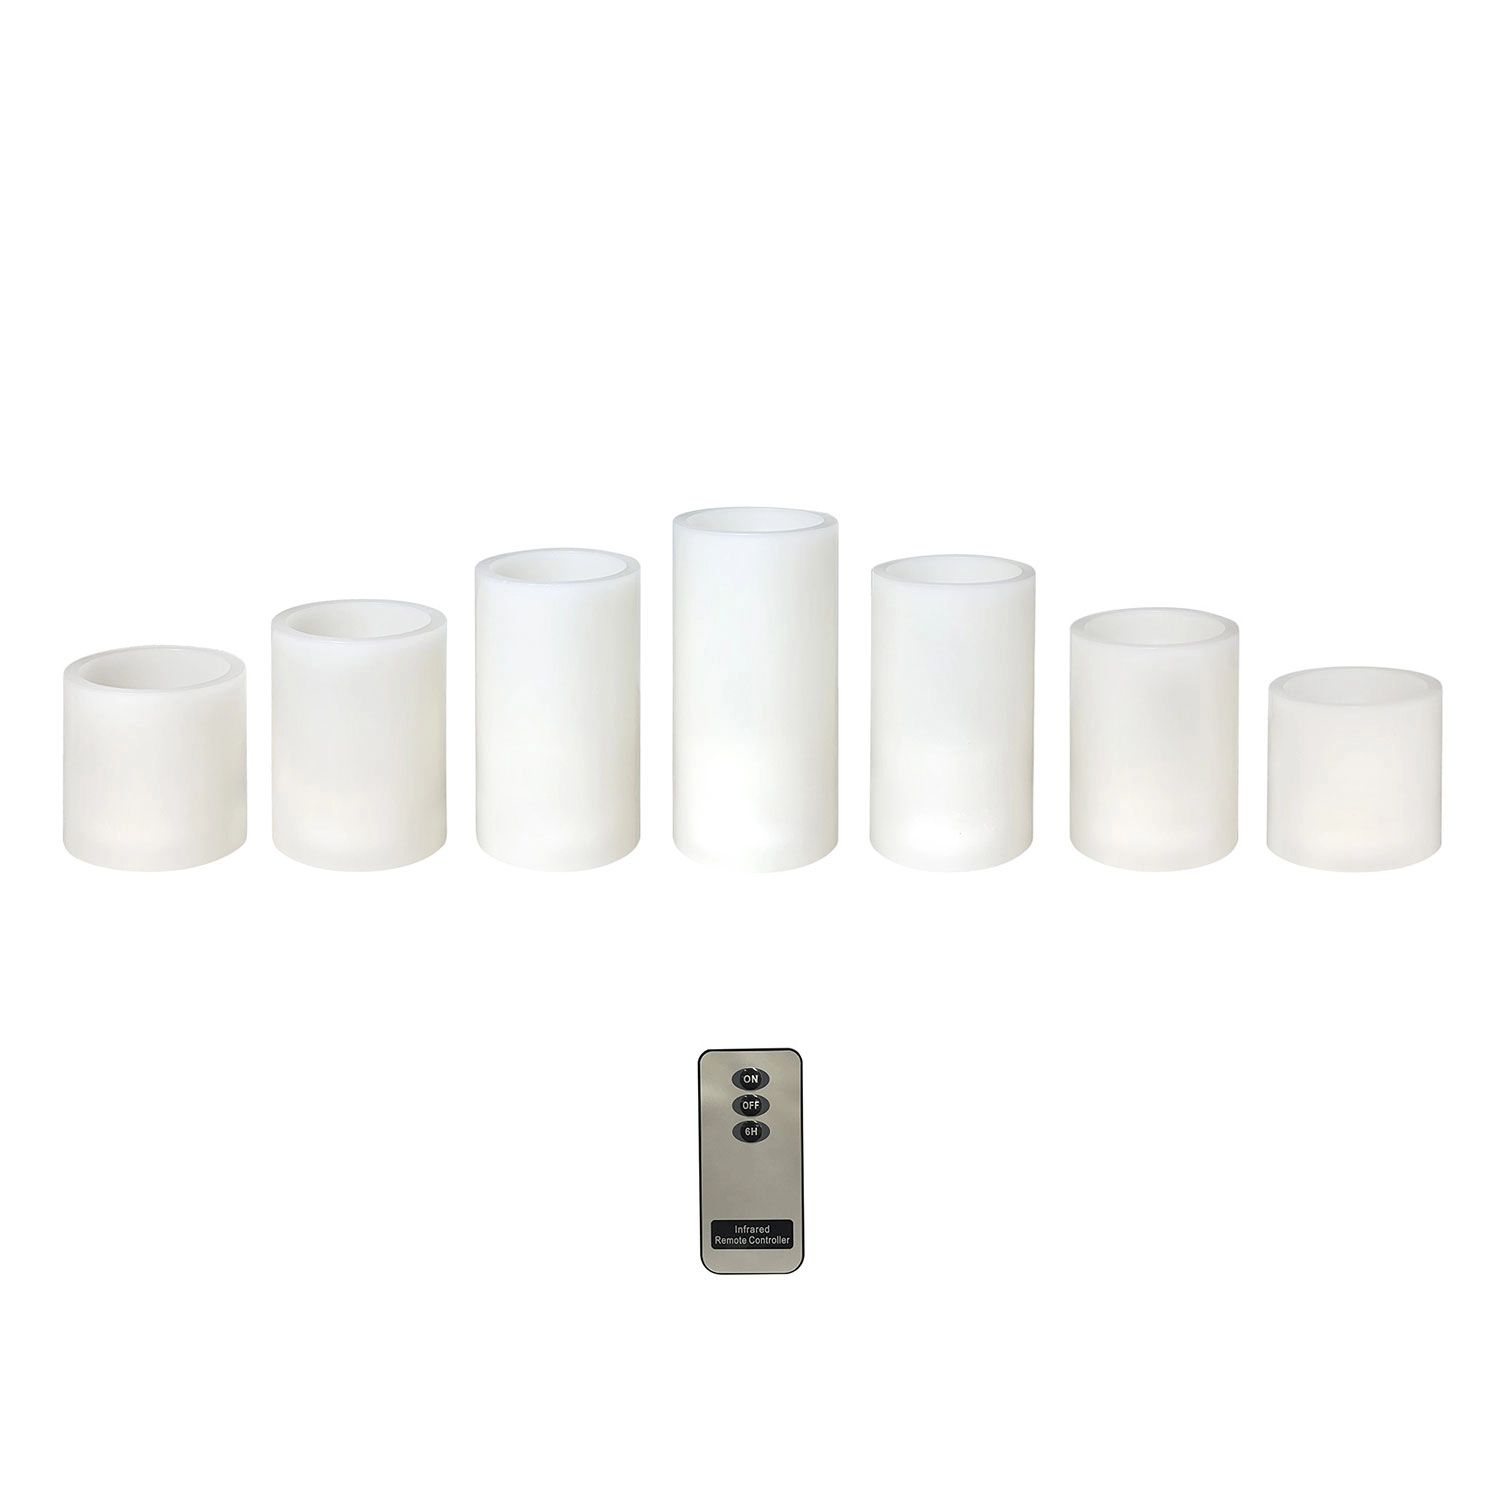 Member's Mark 7-Piece Flameless LED Wax Candles | Sam's Club